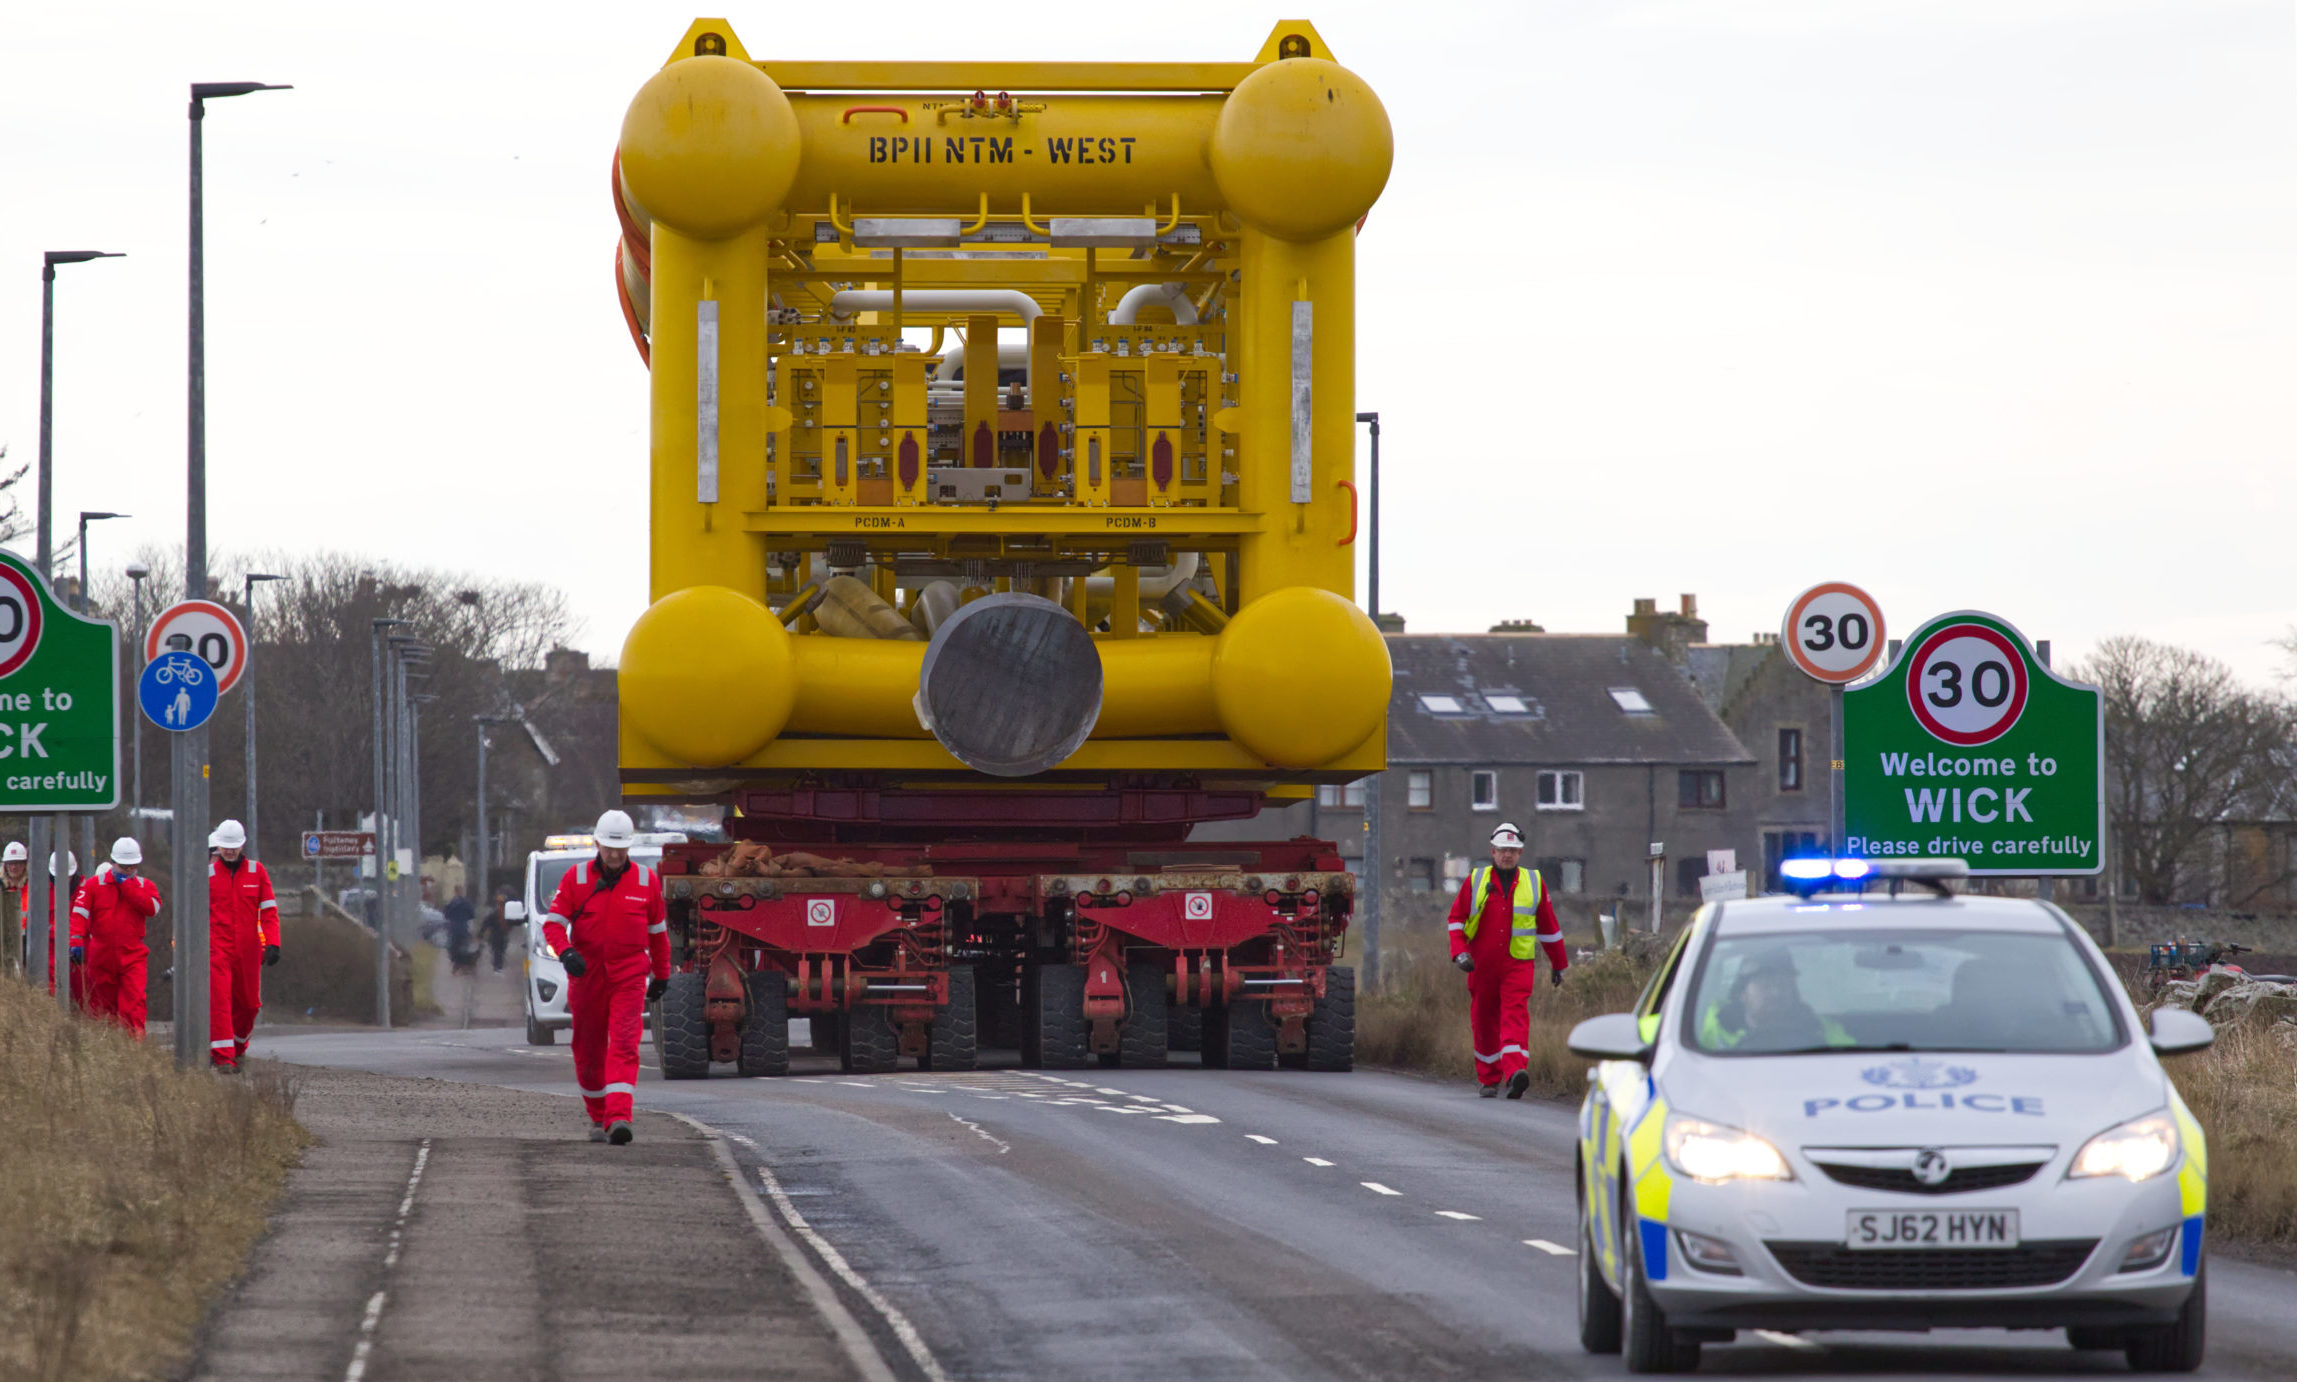 Subsea7 Towhead for the Buzzard Project under escort out of Wick, Caithness for its journey to Wester Site, Caithness this morning.